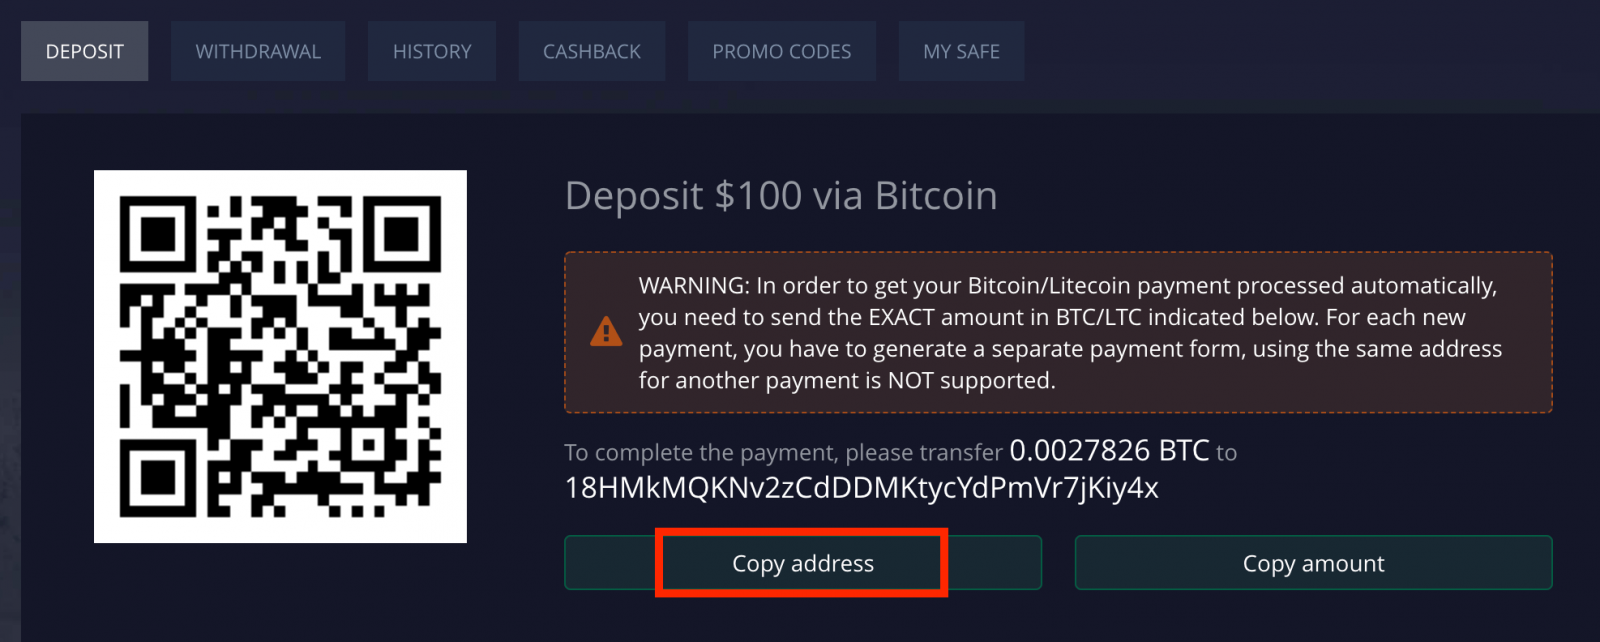 Deposit Money in Pocket Option via Bank Transfer, E-payments (GlobePay, Airtel Money wallet, MobiKwik wallet, JioMoney, OlaMoney wallet, Freecharge wallet, PhonePe wallet) and Cryptocurrency in India